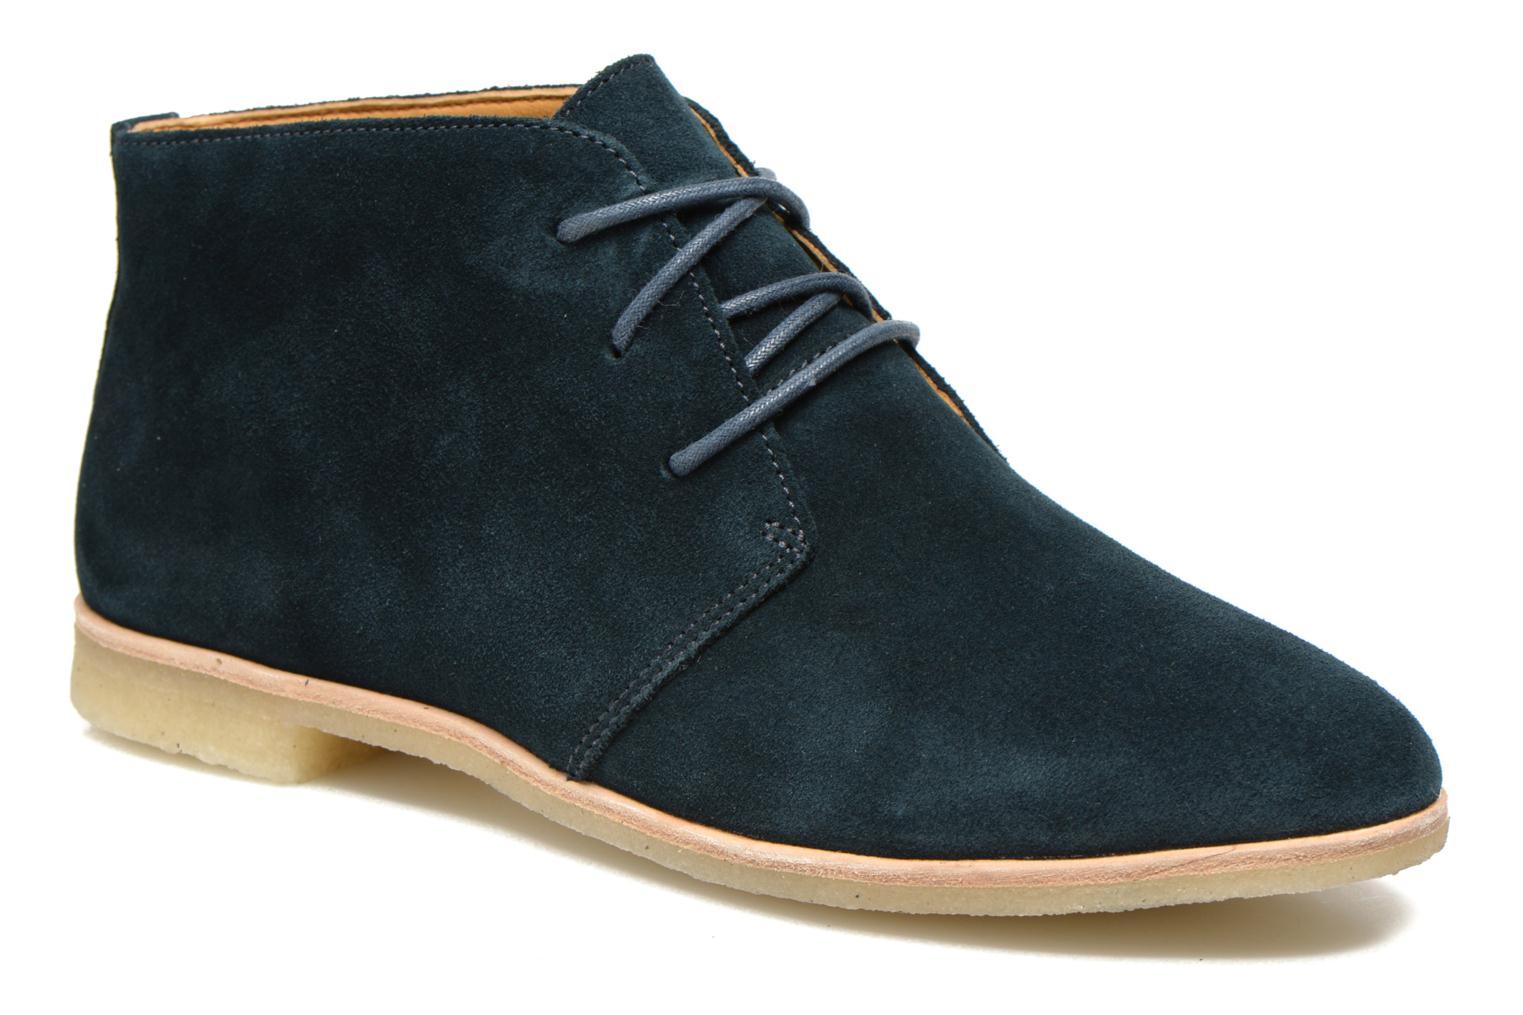 Clarks Originals Womens Phenia Midnight Suede Desert Boots - Stockpoint Apparel Outlet